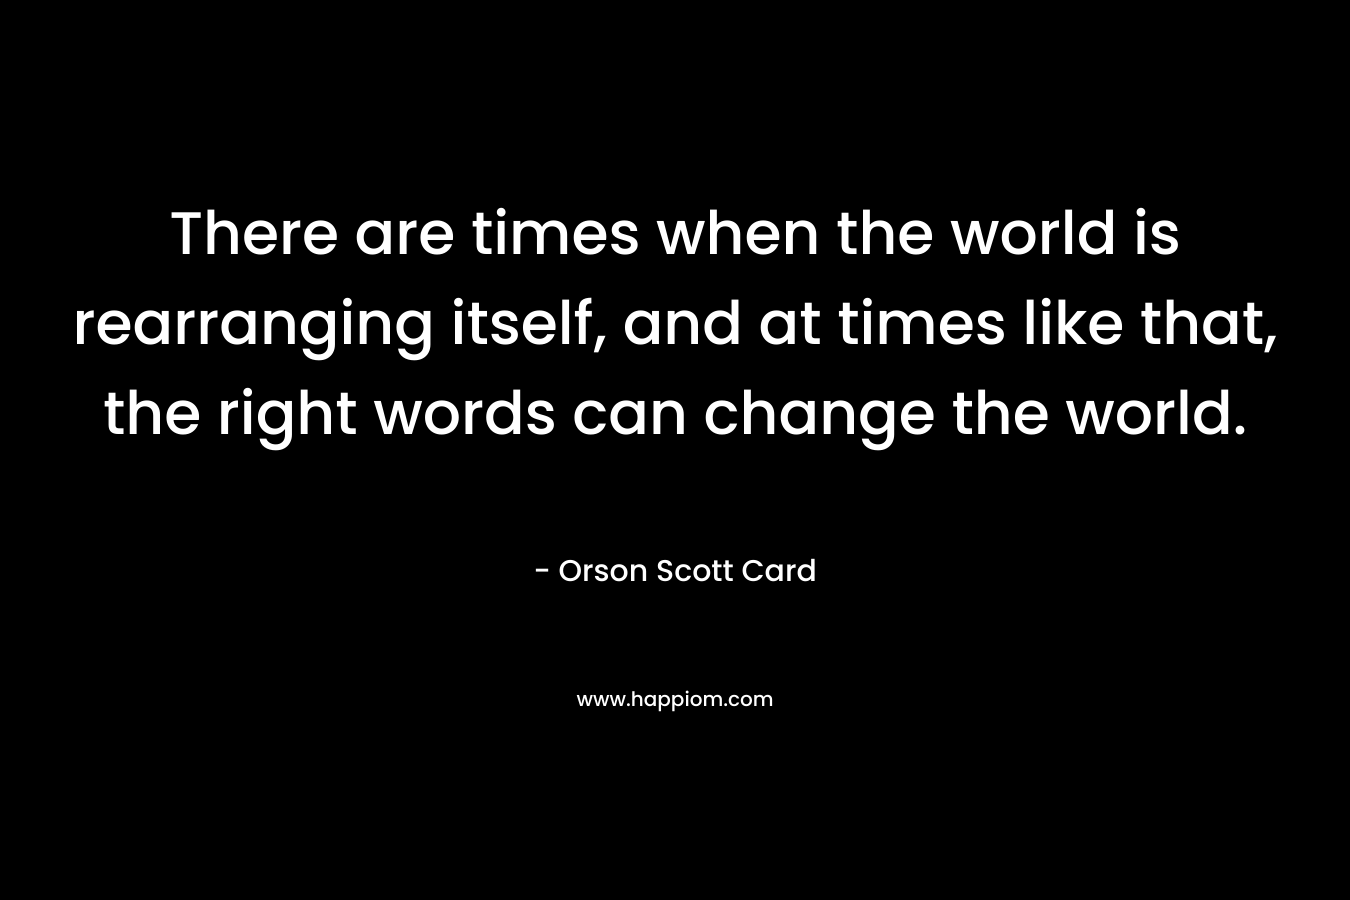 There are times when the world is rearranging itself, and at times like that, the right words can change the world.